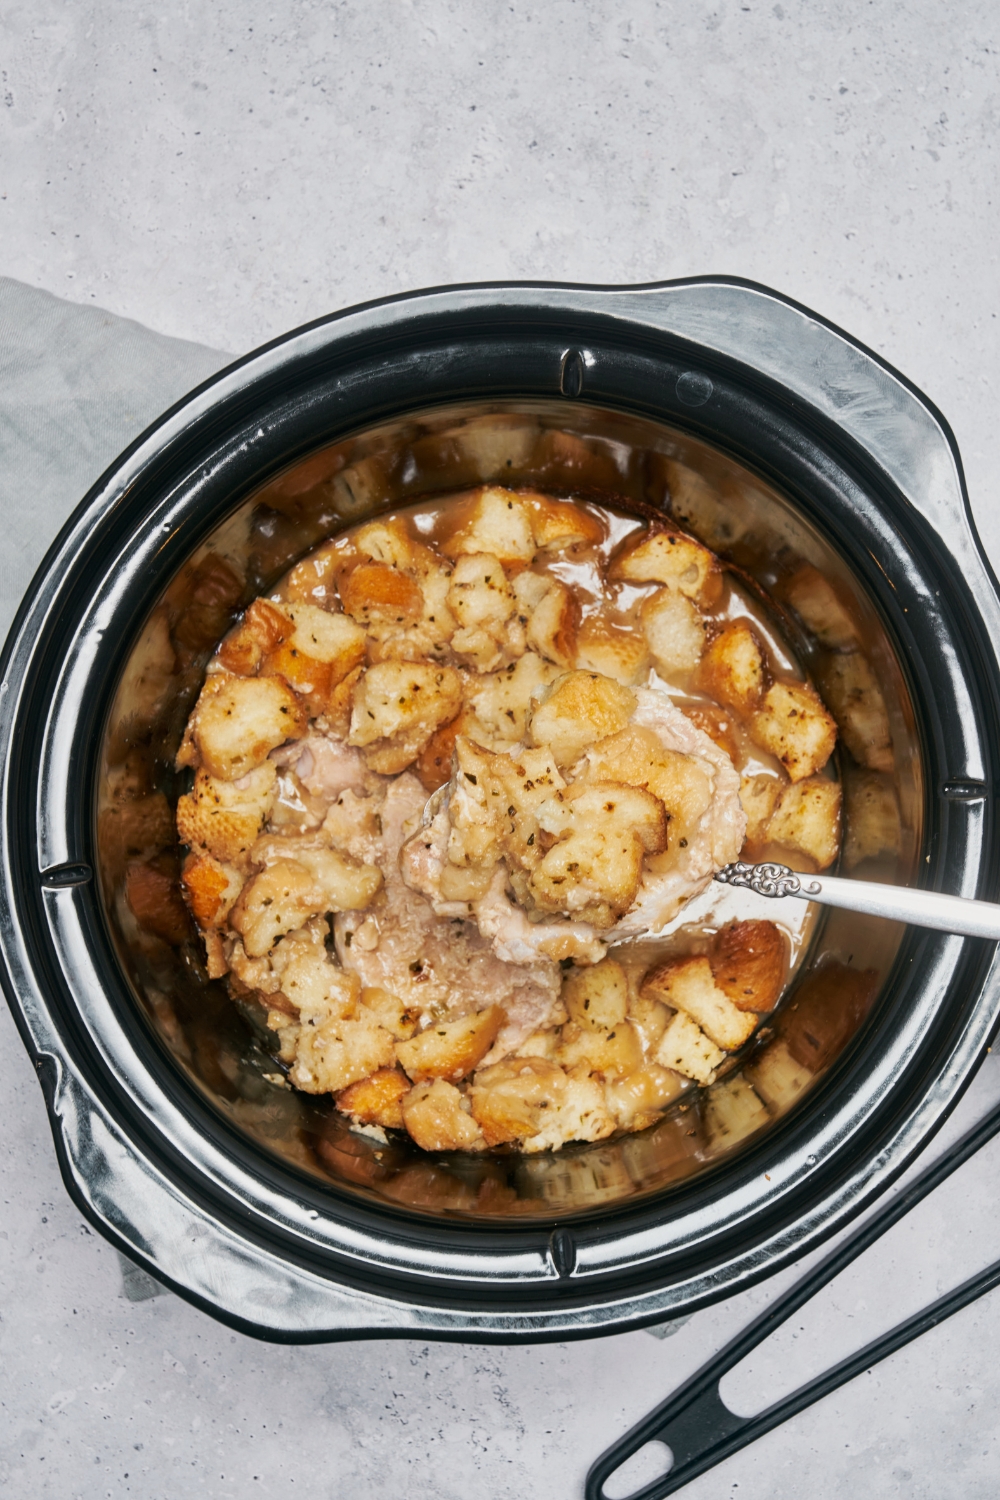 A slow cooker filled with stuffing in a creamy soup mixture and a large spoon is scooping out the stuffing.